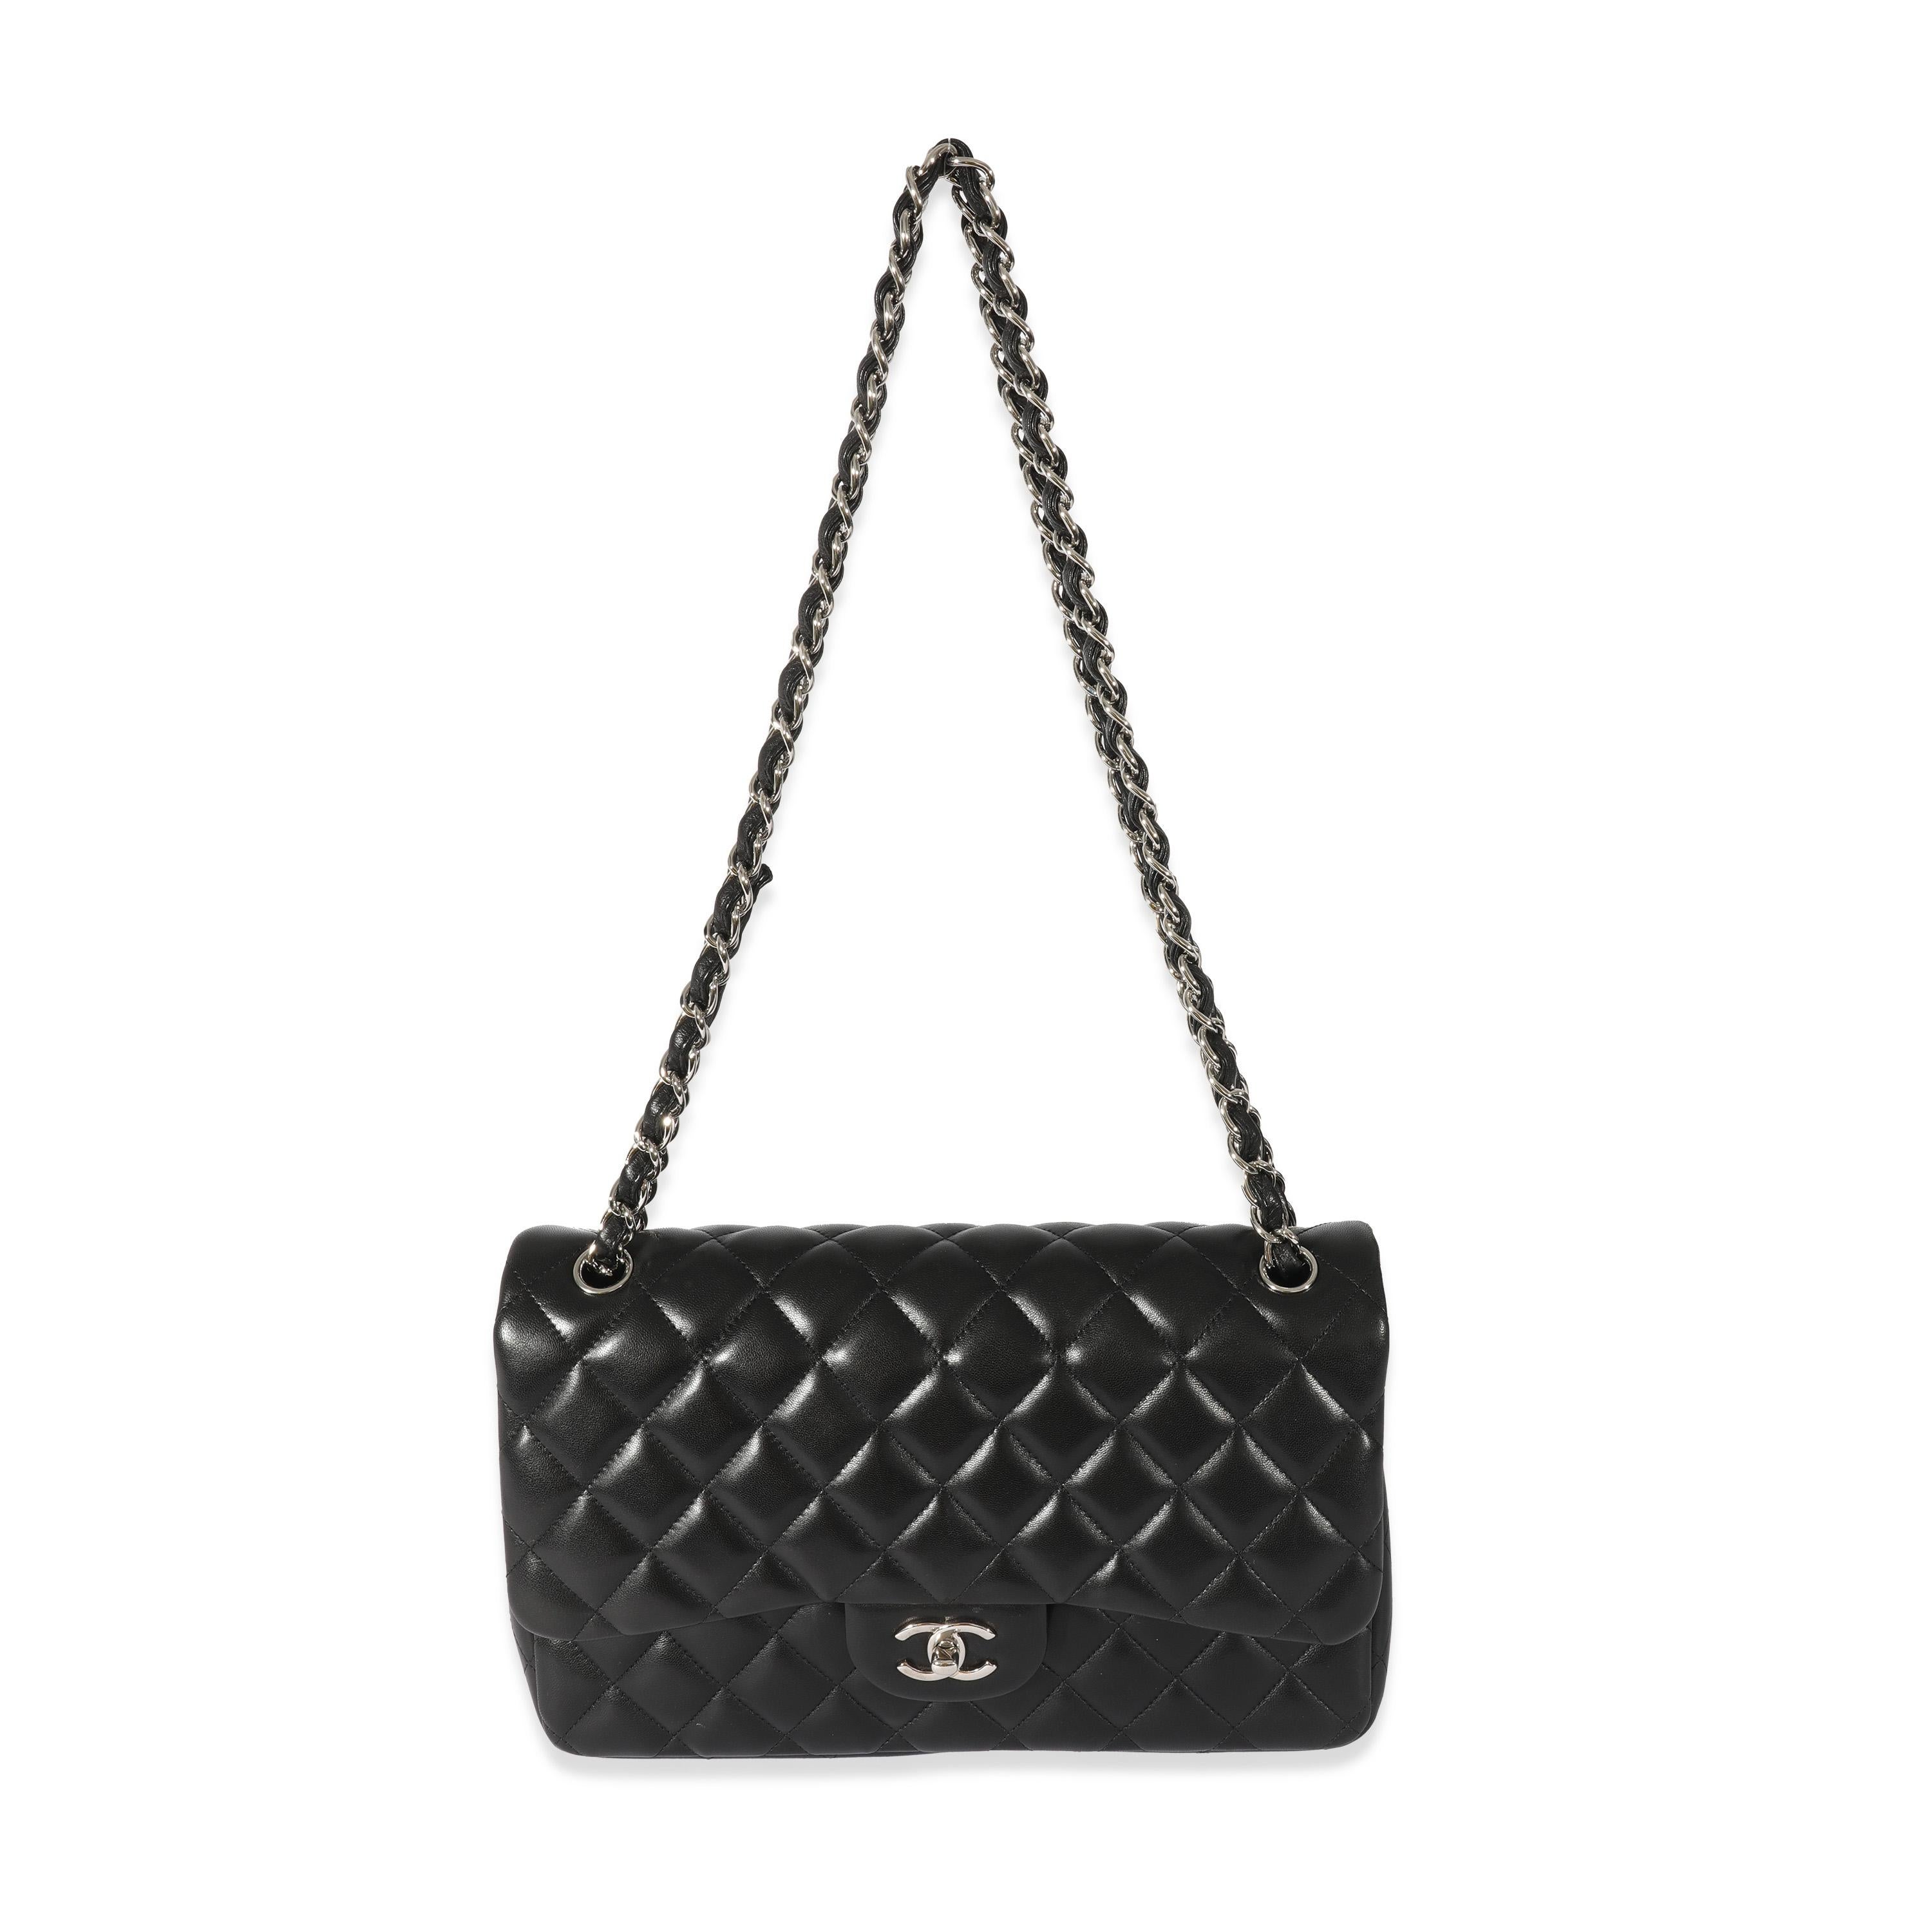 Listing Title: Chanel Black Lambskin Jumbo Classic Double Flap
 SKU: 128668
 MSRP: 9500.00
 Condition: Pre-owned 
 Condition Description: A timeless classic that never goes out of style, the flap bag from Chanel dates back to 1955 and has seen a